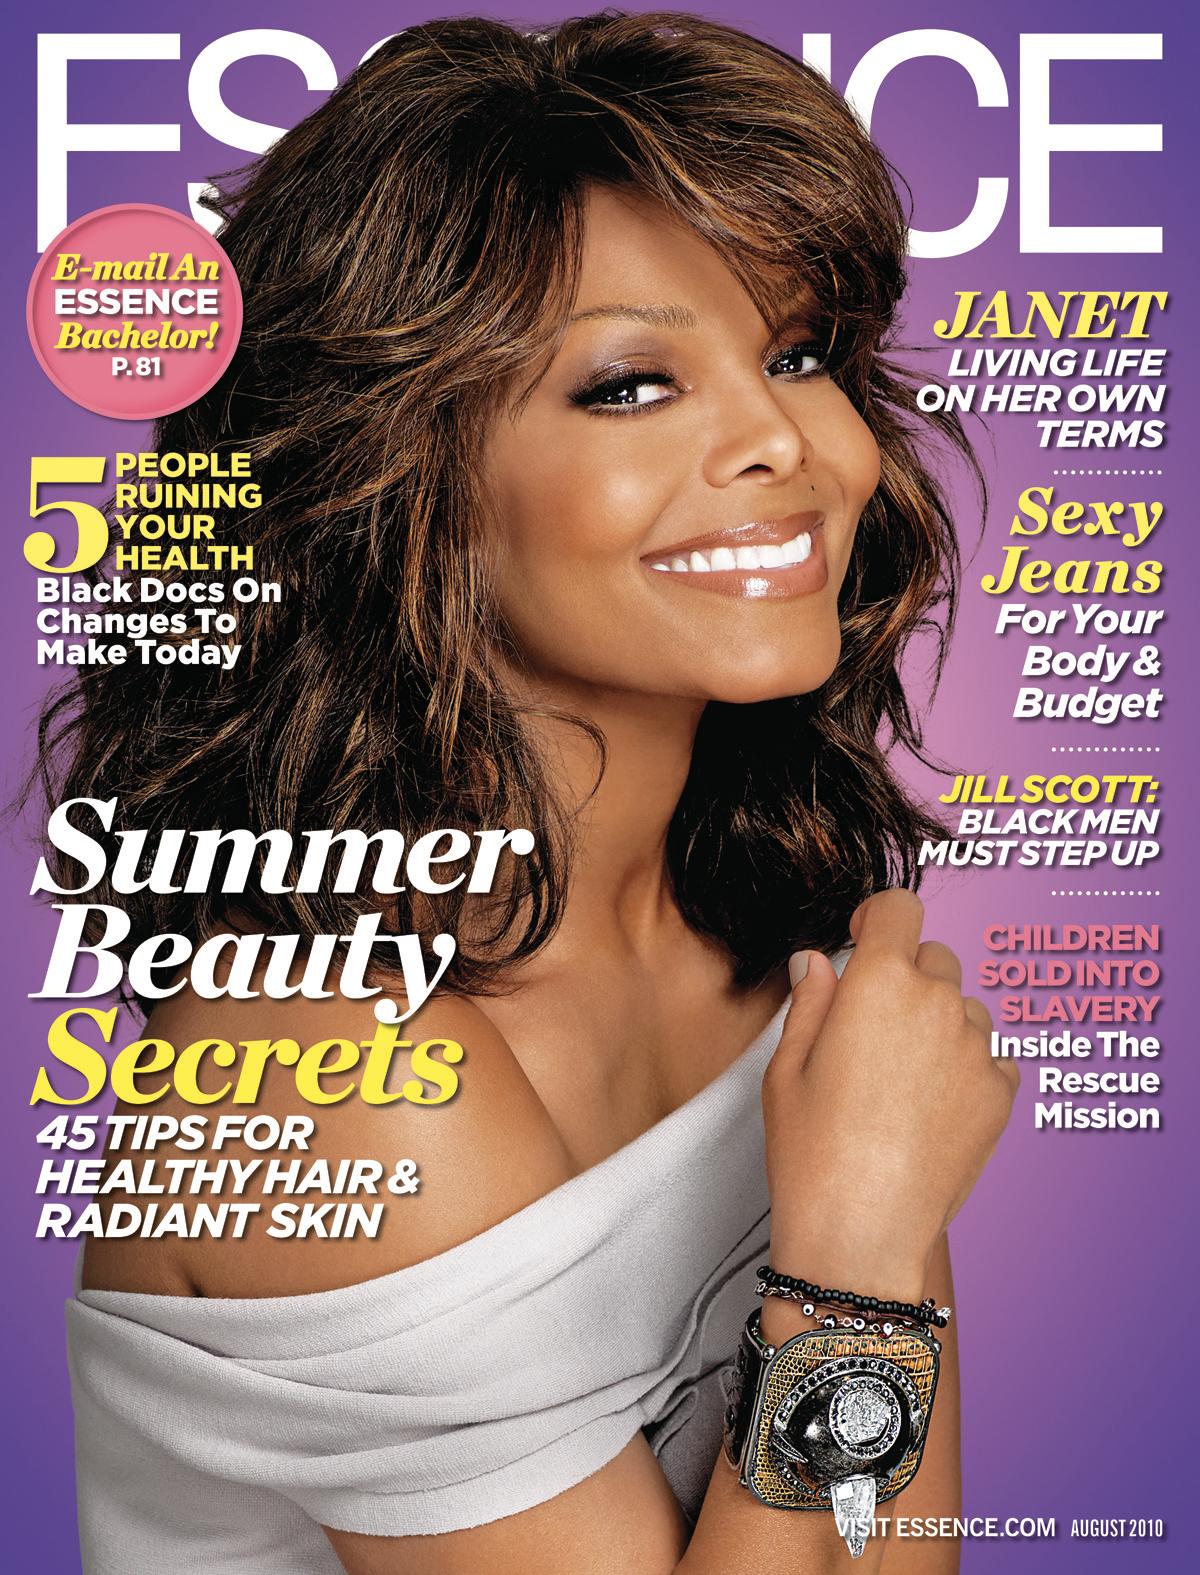 A Look Back At Janet Jackson On The Cover of ESSENCE Over The Years